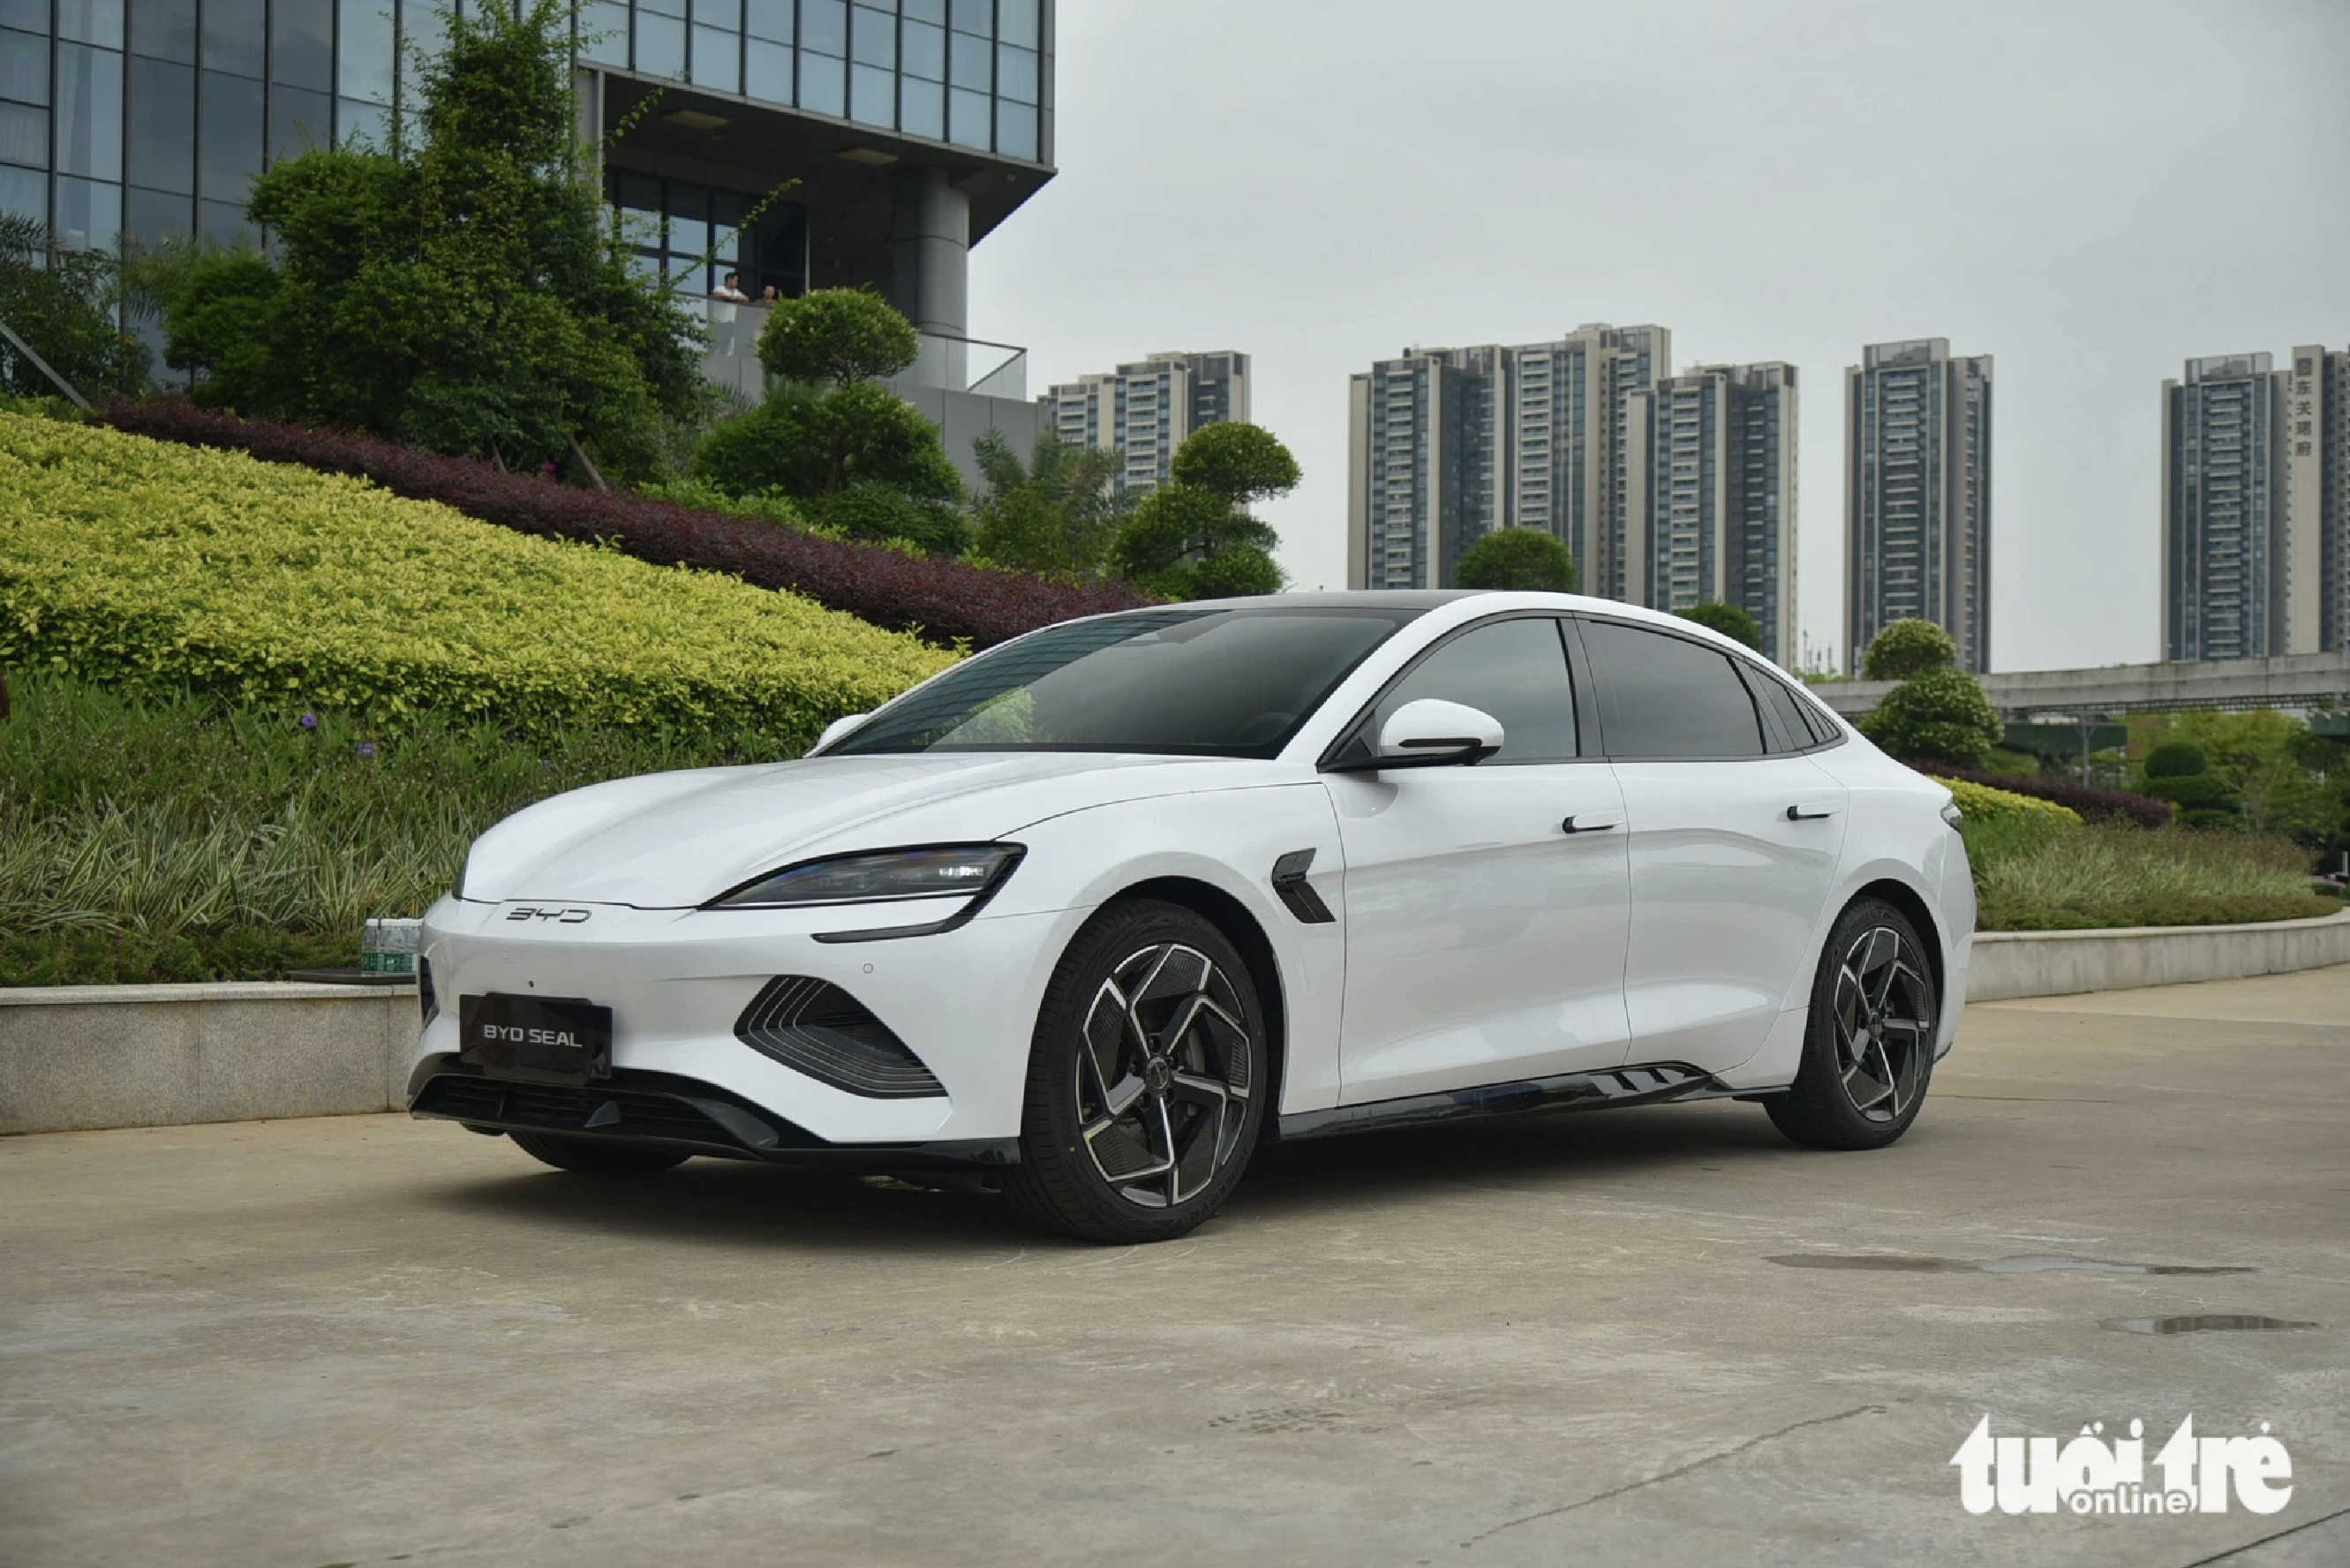 The BYD Seal is a battery electric mid-size fastback sedan. Photo: Lee Hoang / Tuoi Tre